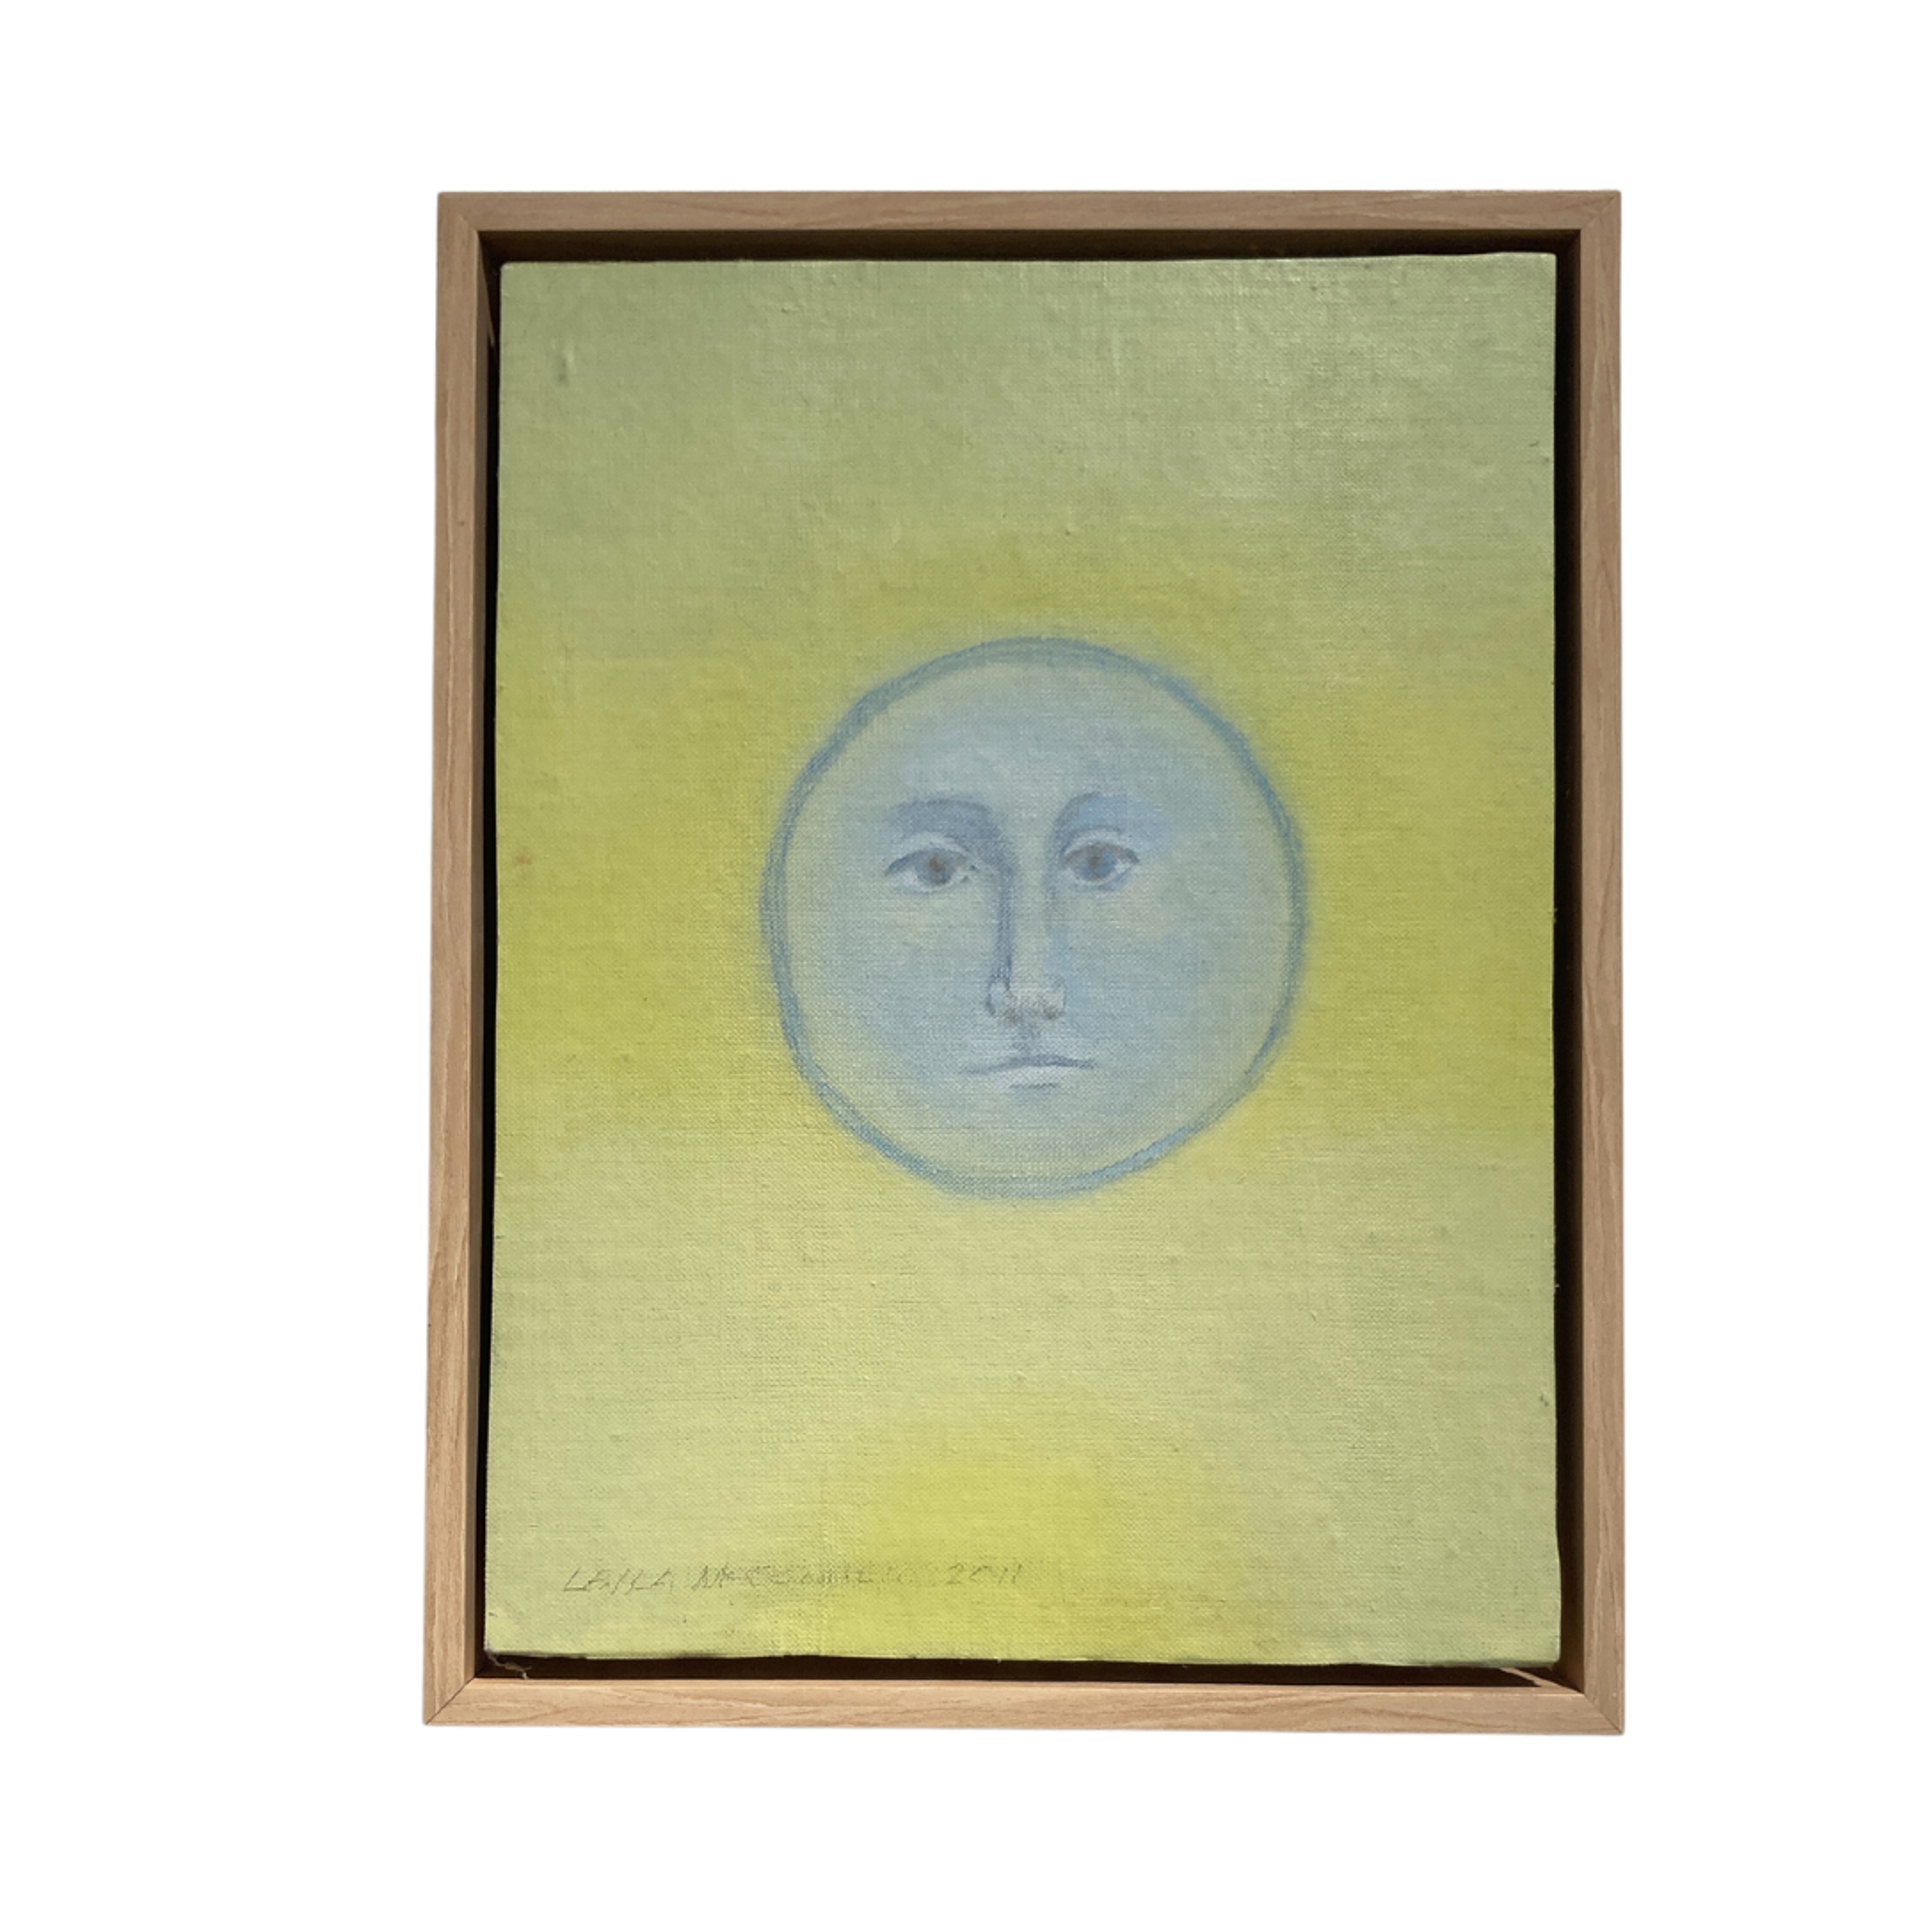 Moonface - light blue gray on yellow by Leila McConnell